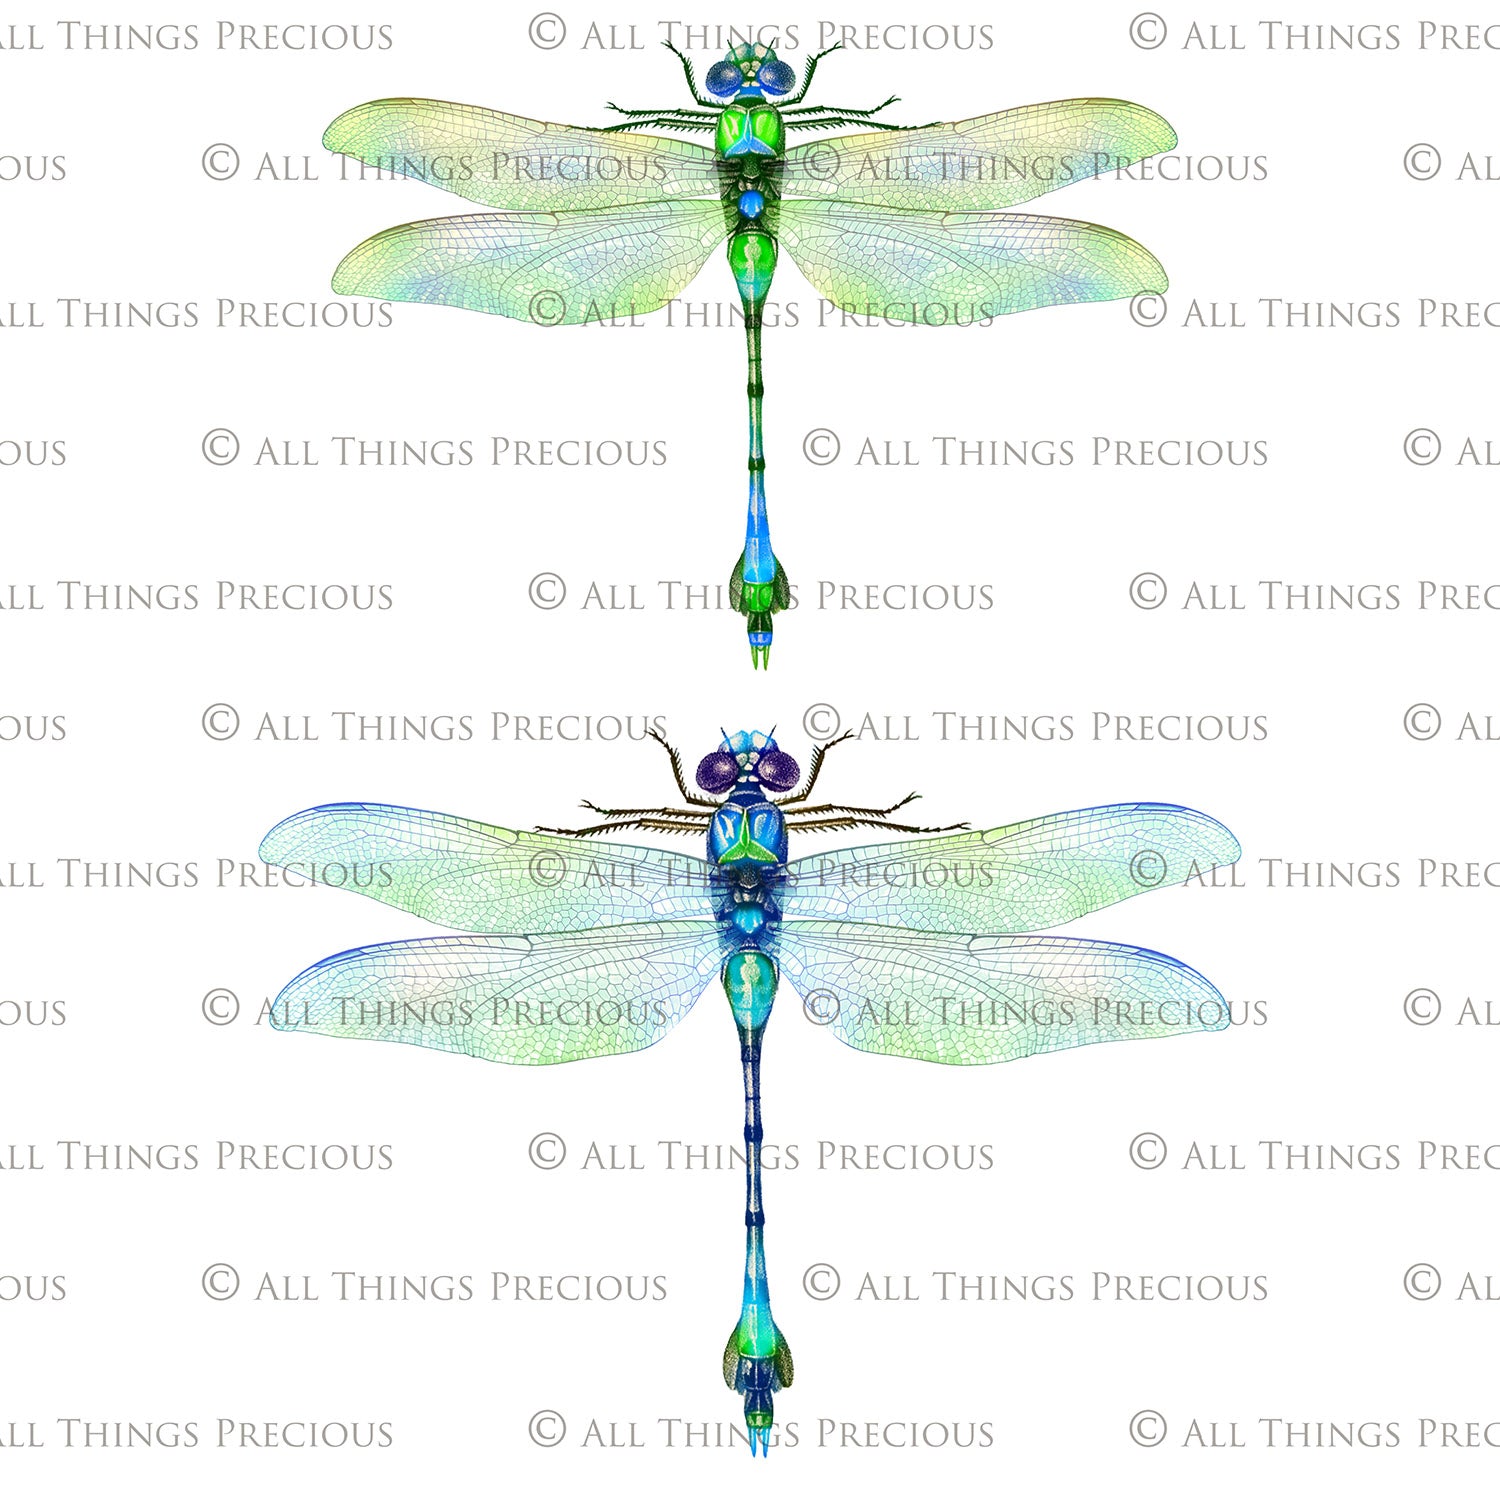 Png clipart for Photographers, Digital scrapbooking, Photo Overlays, Digital Overlay, Png Overlays, High resolution, Dragonfly overlays, Dragonflies clipart by ATP Textures Photoshop.